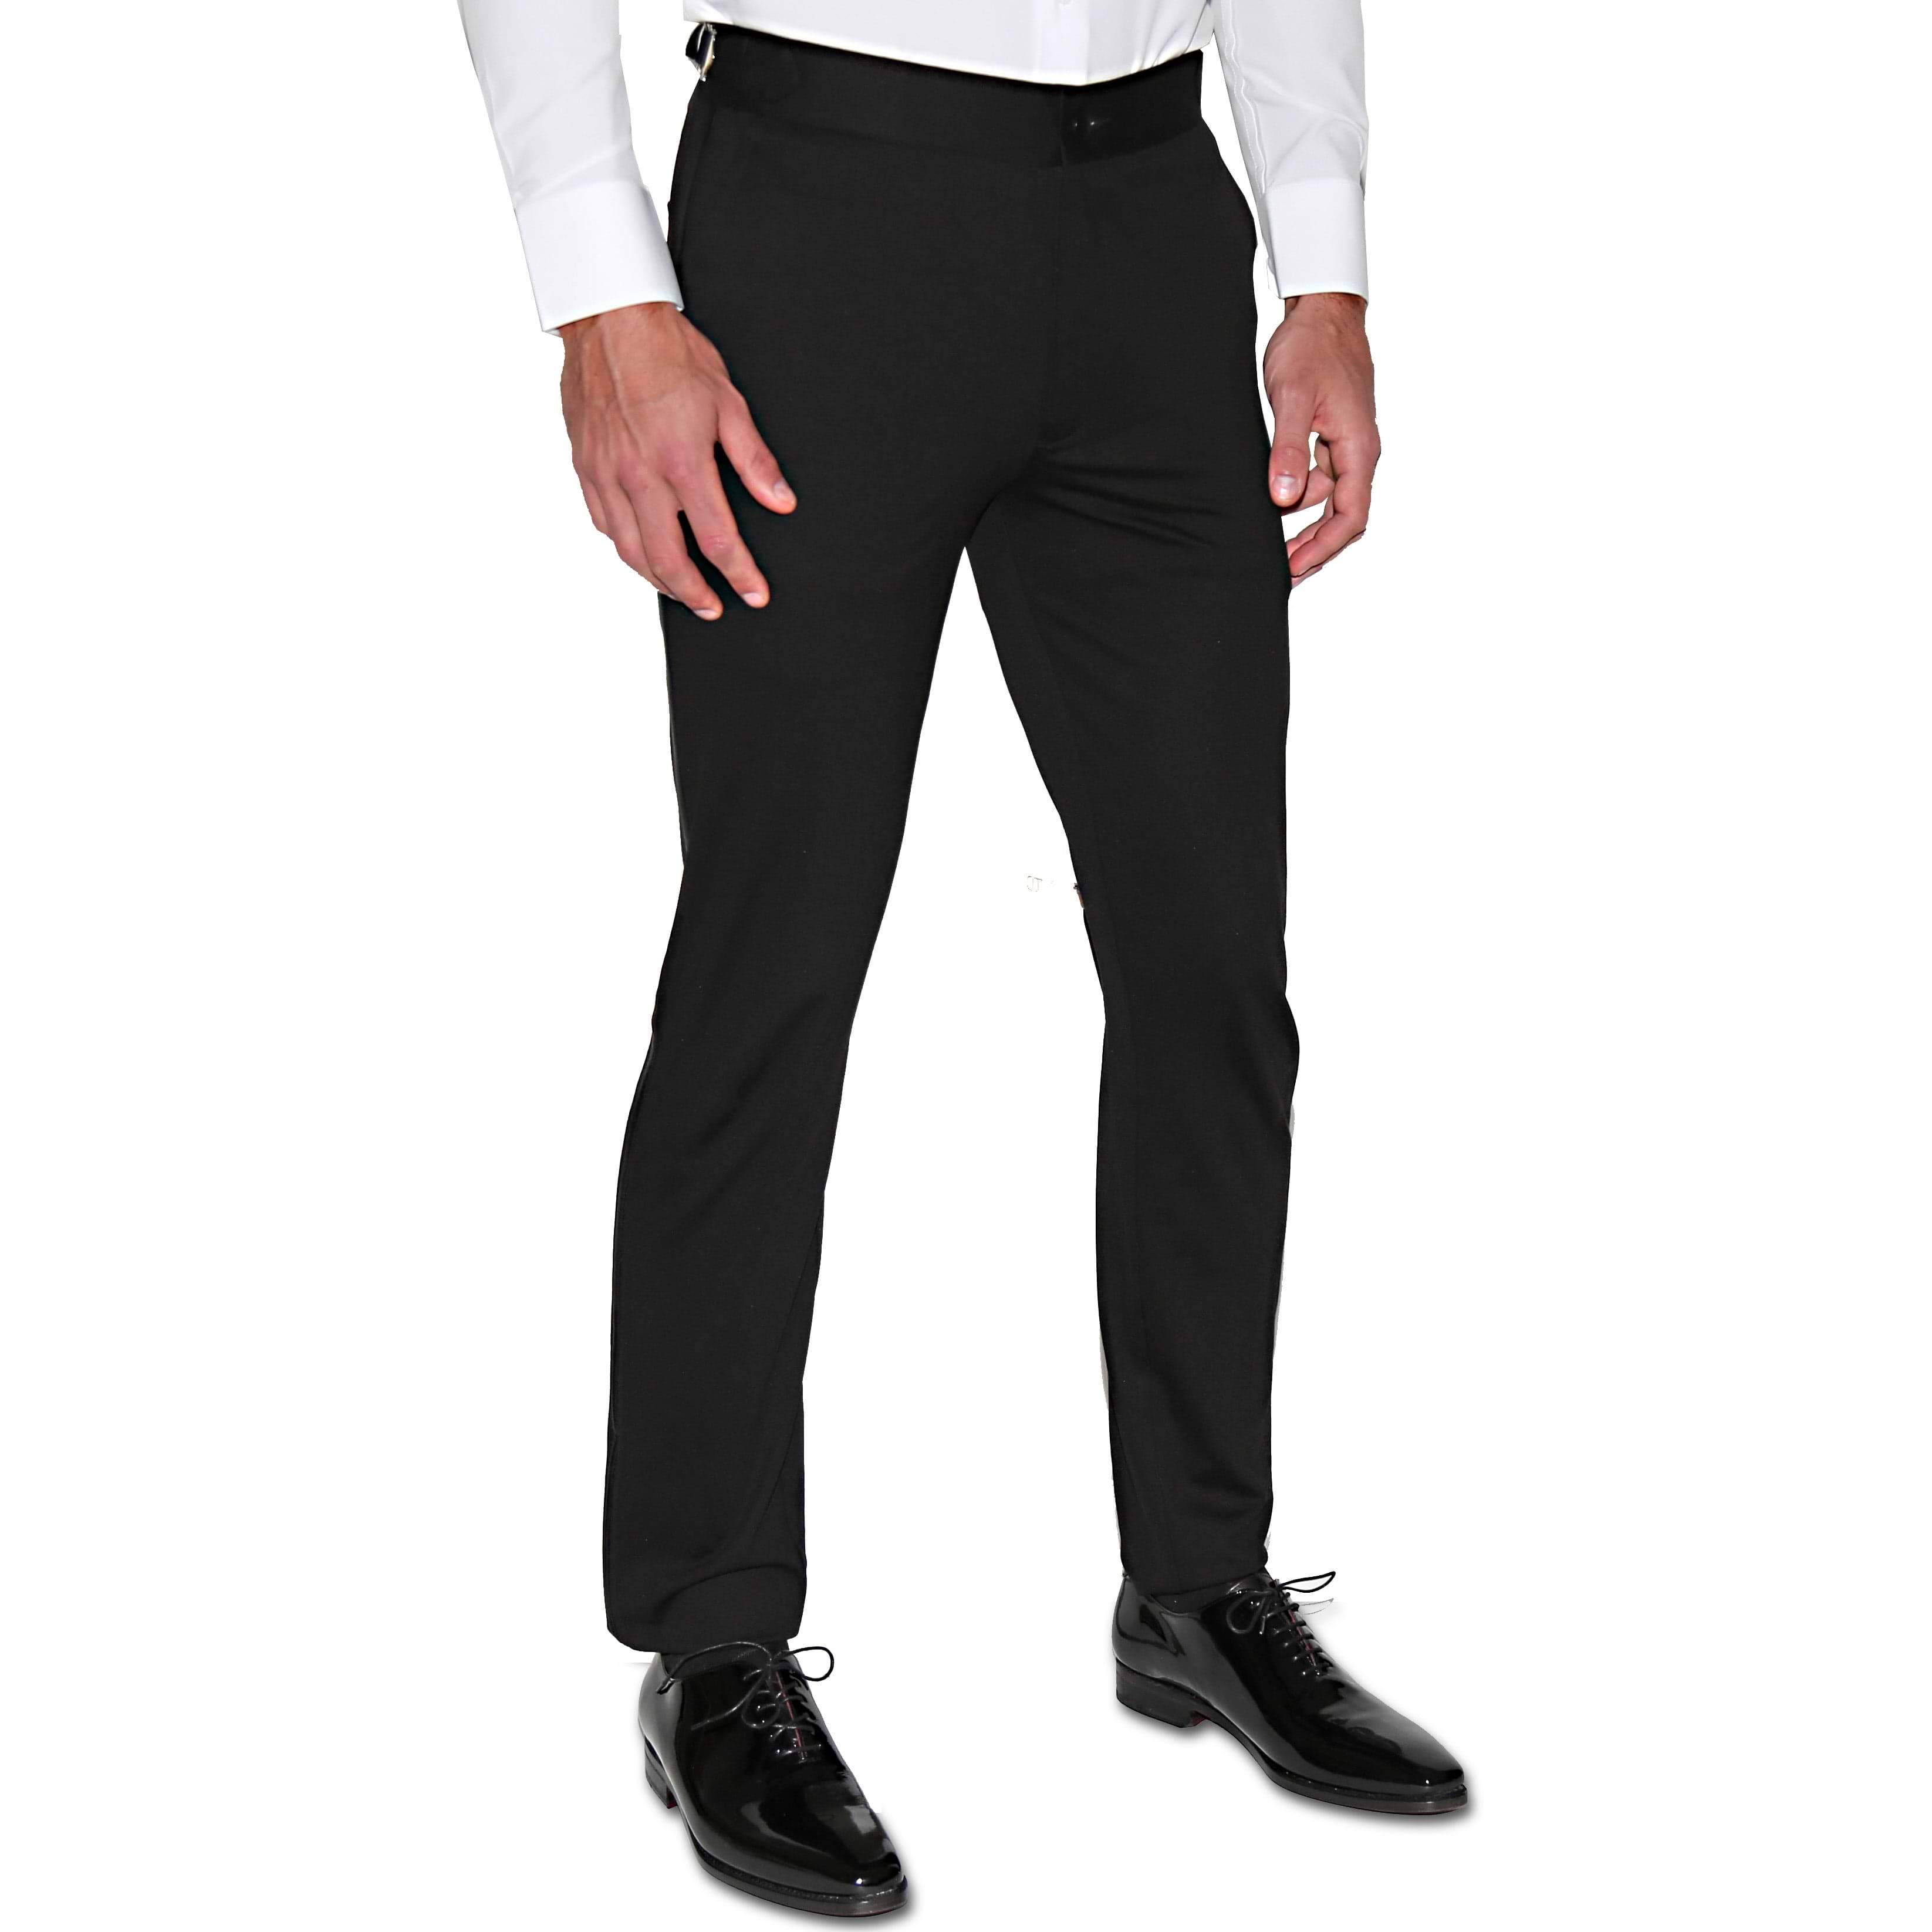 Rclothes Regular Fit Men Pink Trousers - Buy Rclothes Regular Fit Men Pink  Trousers Online at Best Prices in India | Flipkart.com